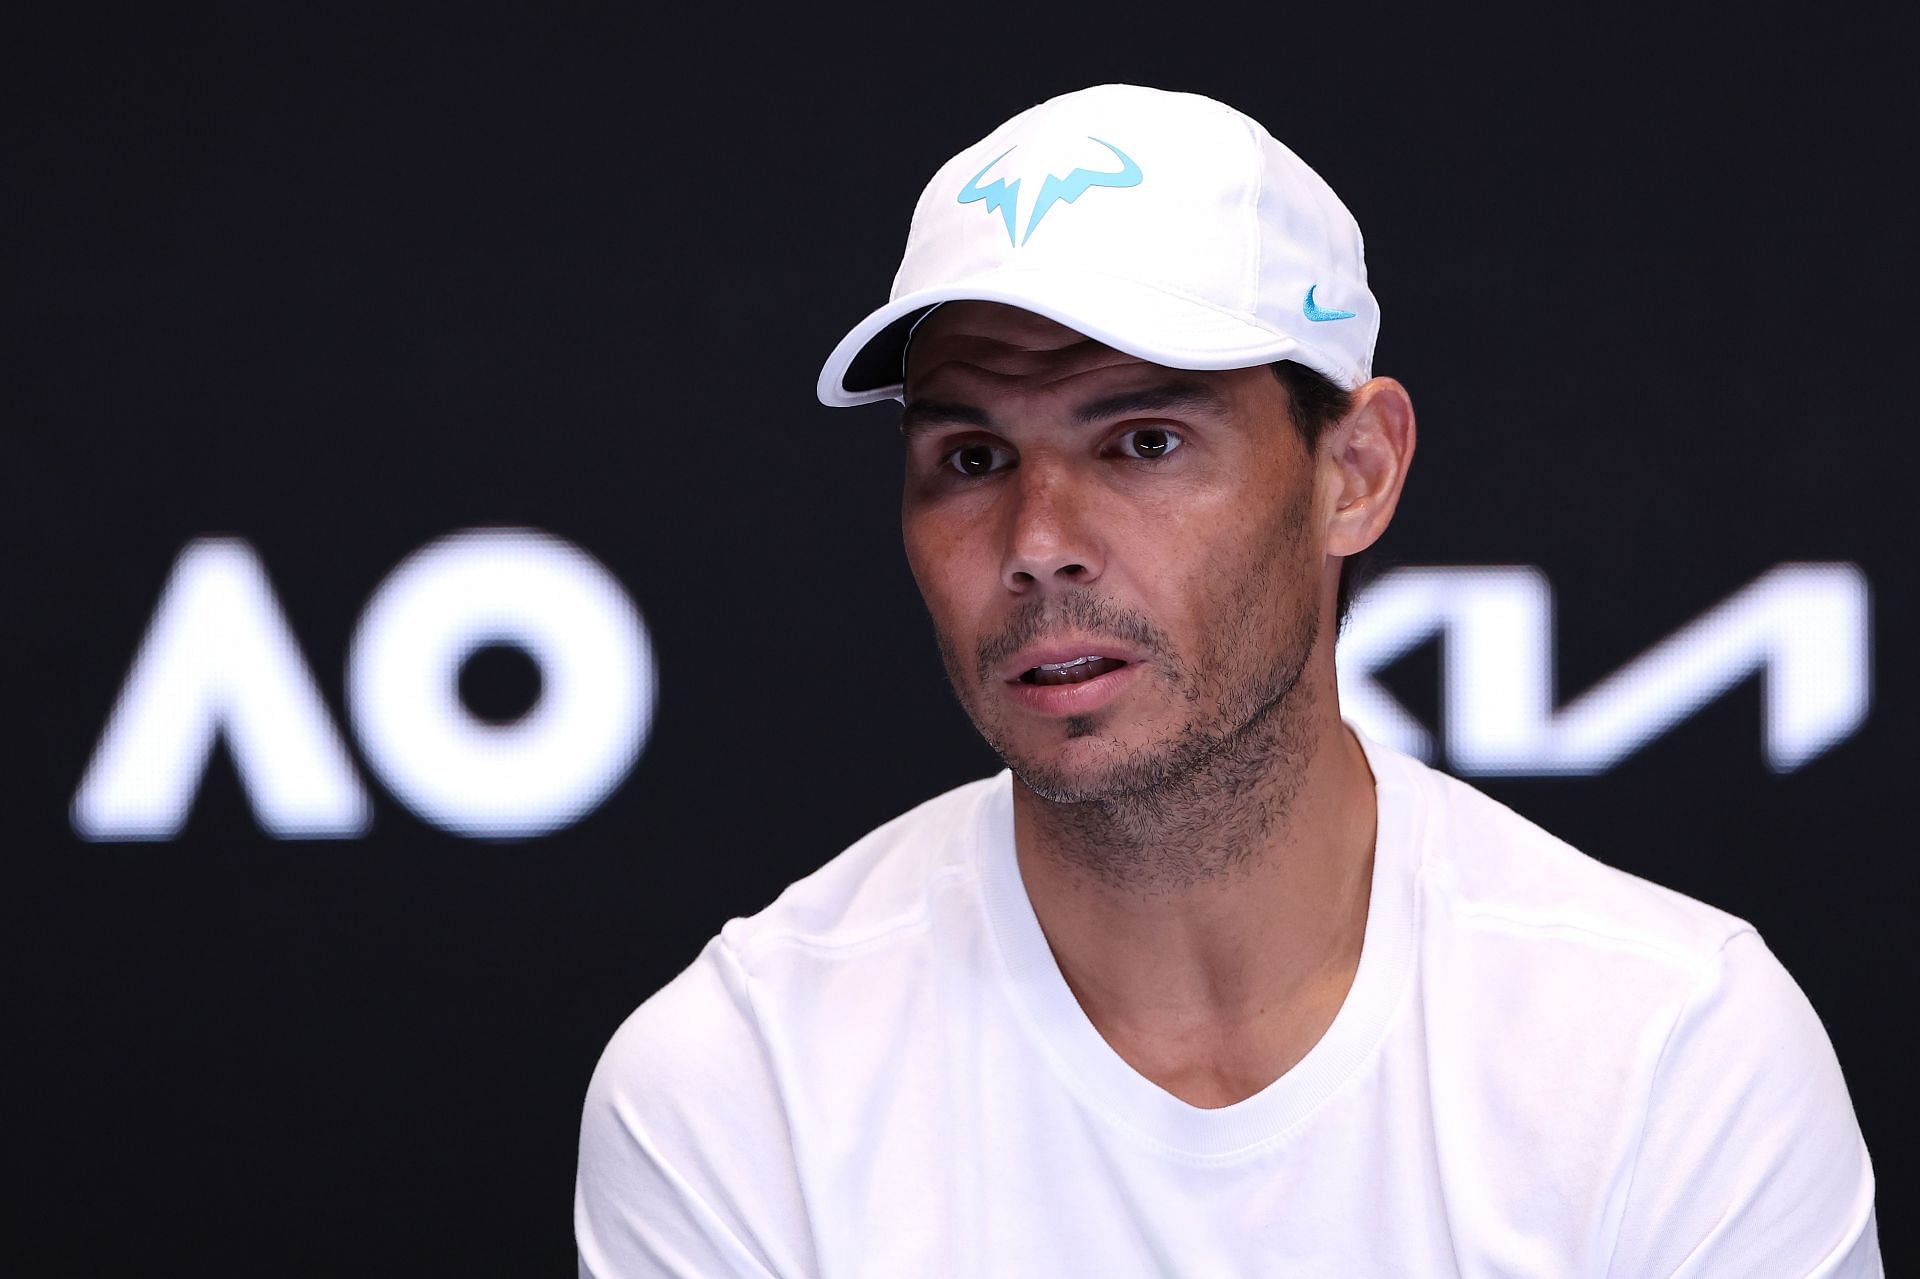 Rafael Nadal in a press conference at the Australian Open 2023